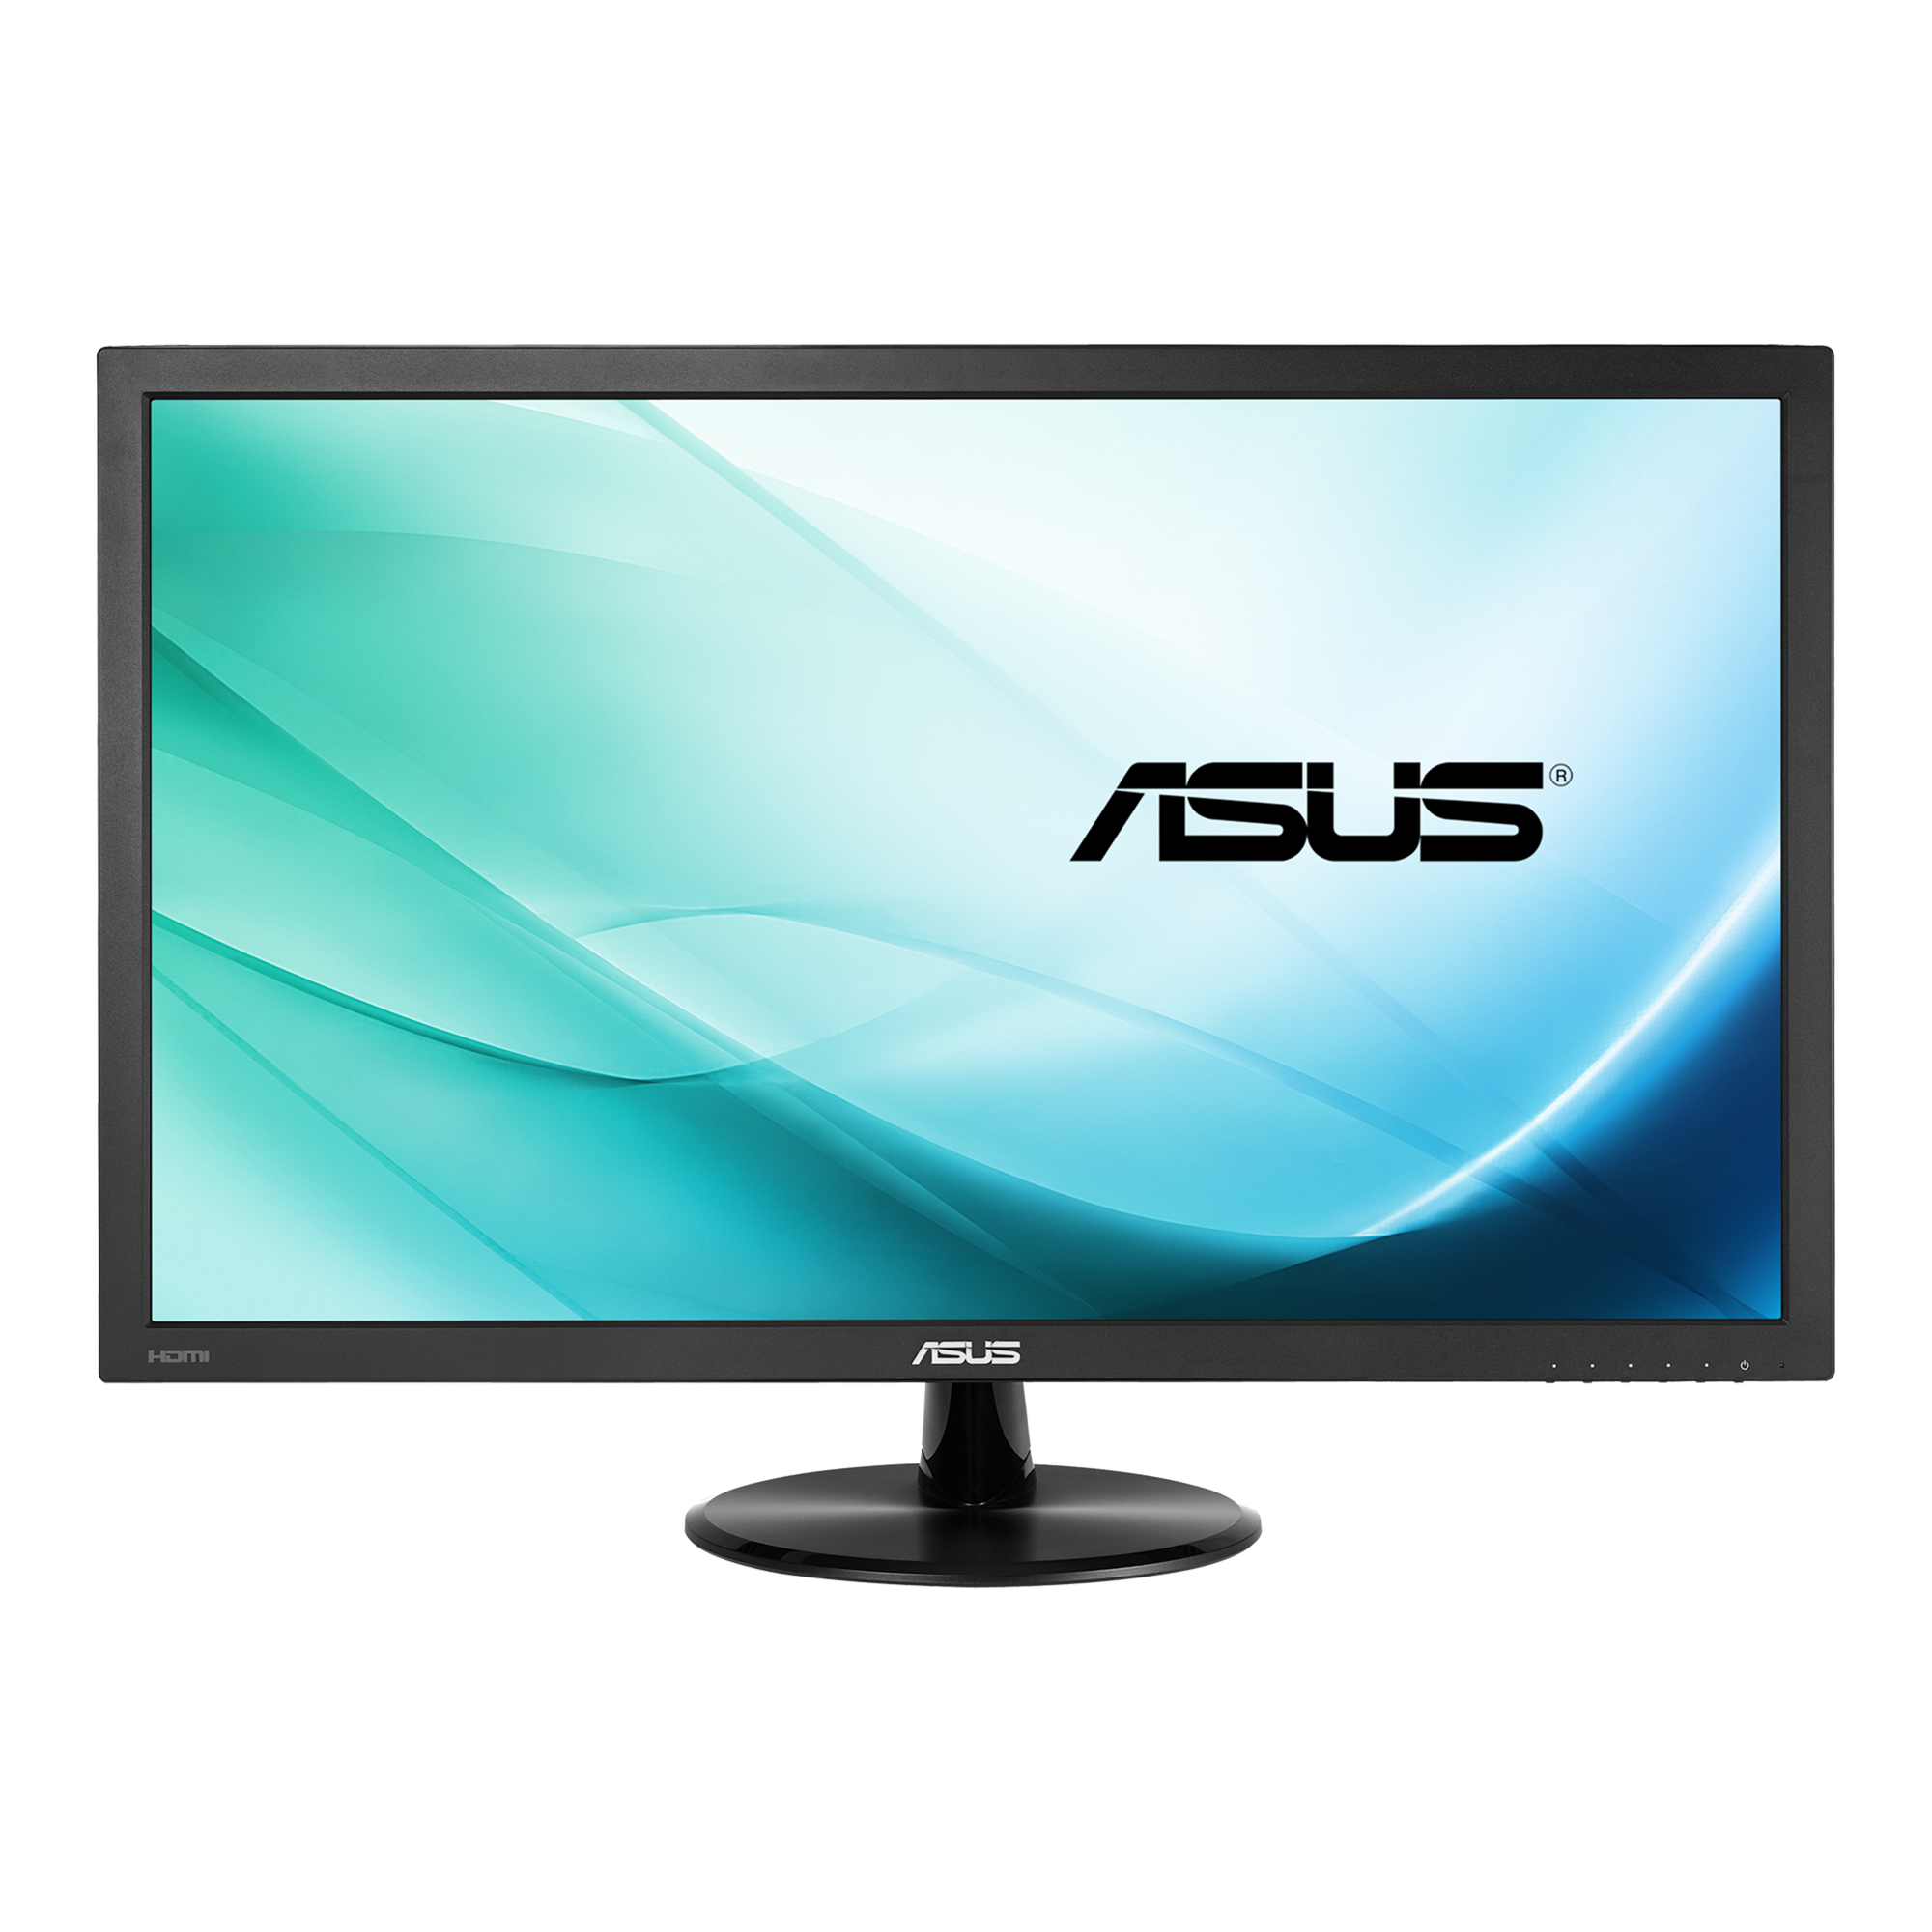 【USED】ASUS VP228HE1ms入力端子